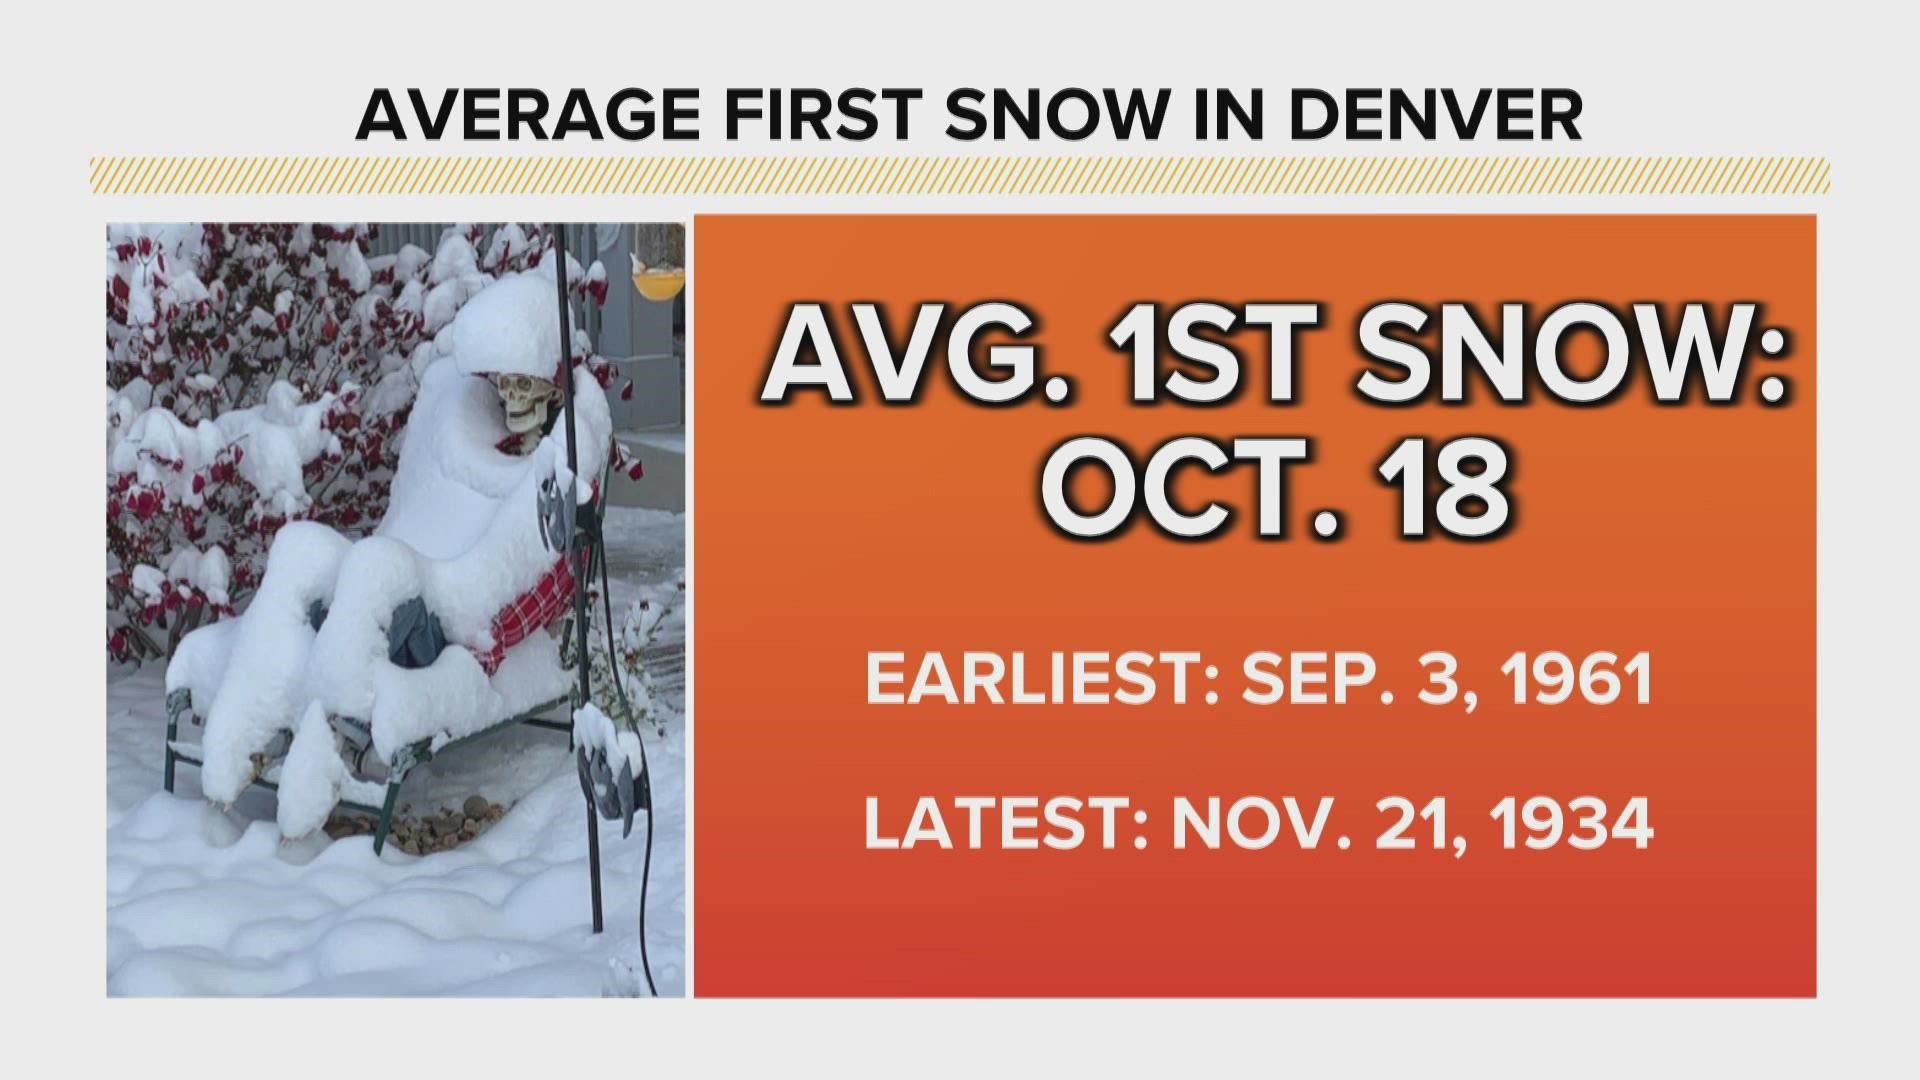 It's November, and it still hasn't snowed in Denver. Chris Bianchi tells us what that means for the rest of the winter season.